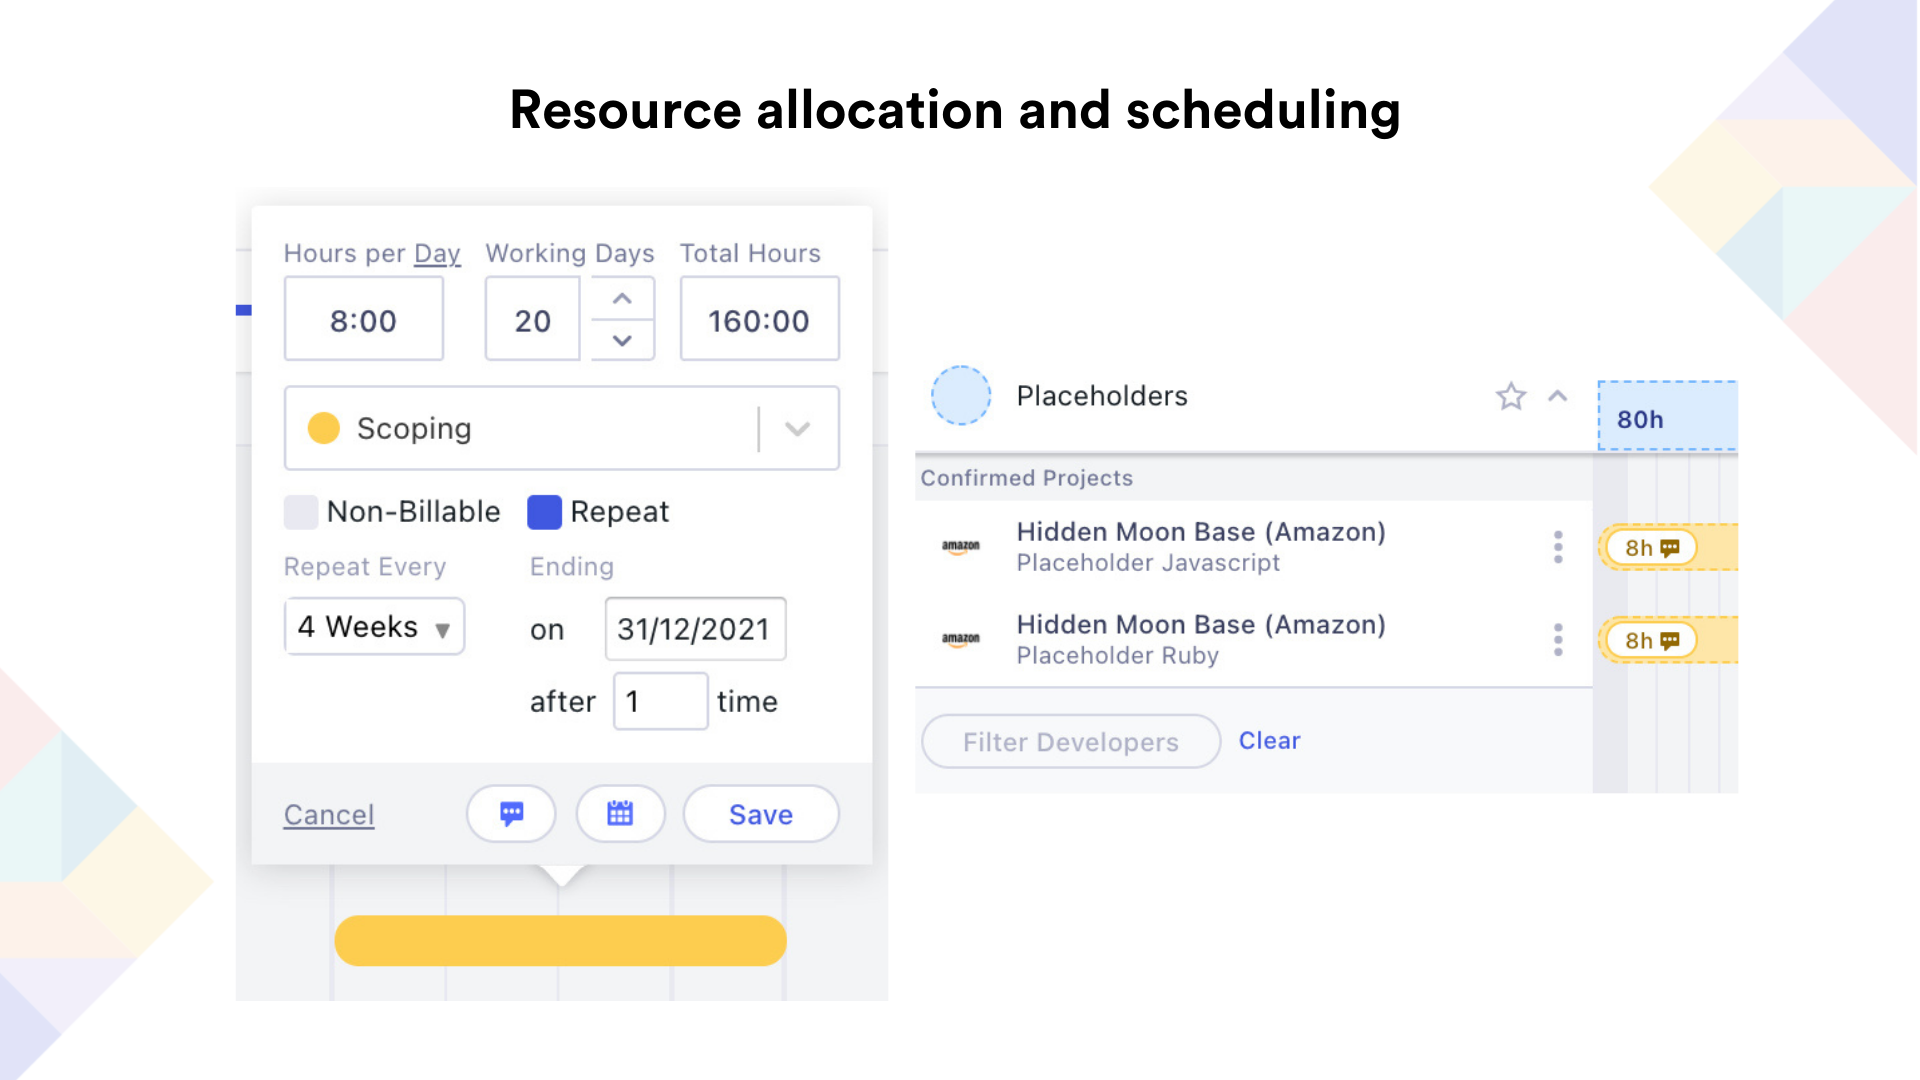 Drag-and-drop allocations and time off. Use placeholders when you don't yet know who to assign the work to.